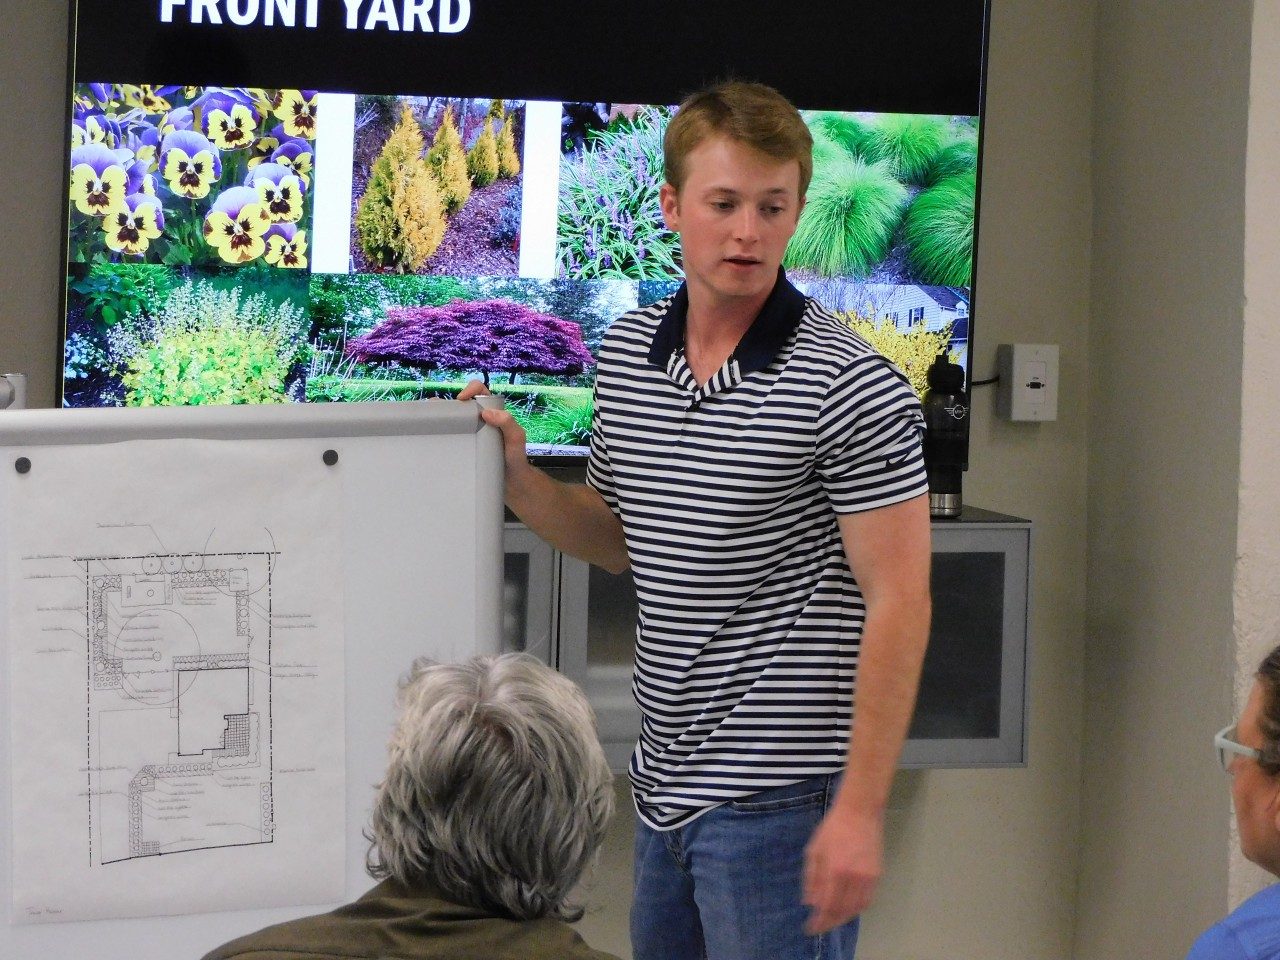 Students in the Landscape Design class present their designs.